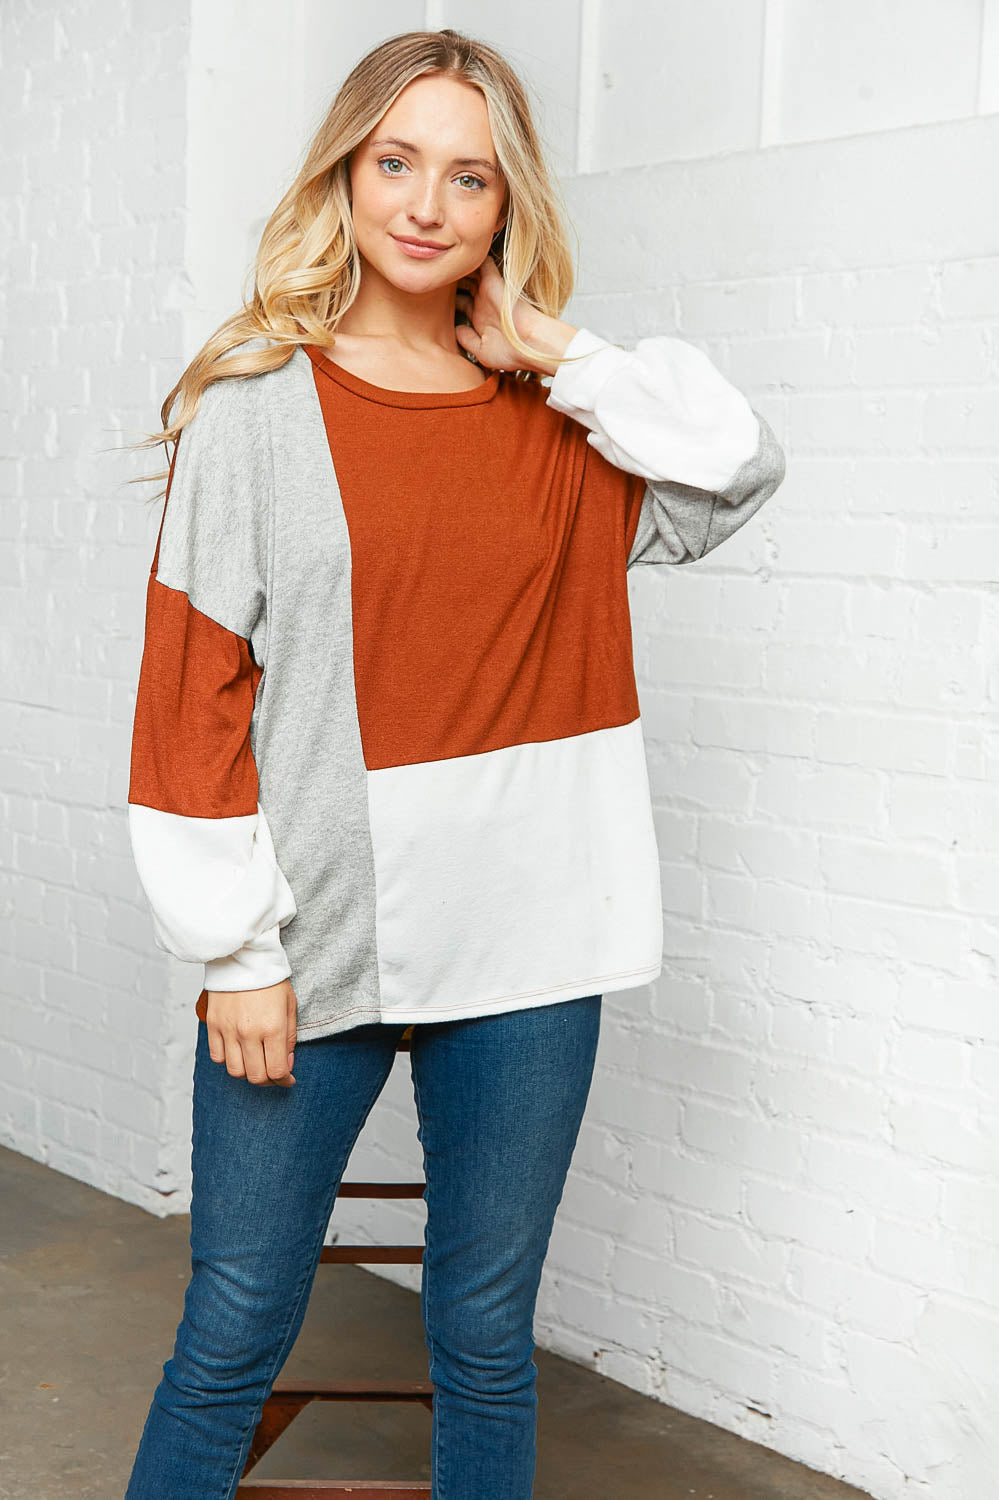 Two-Tone Soft Color Block Sweater Top